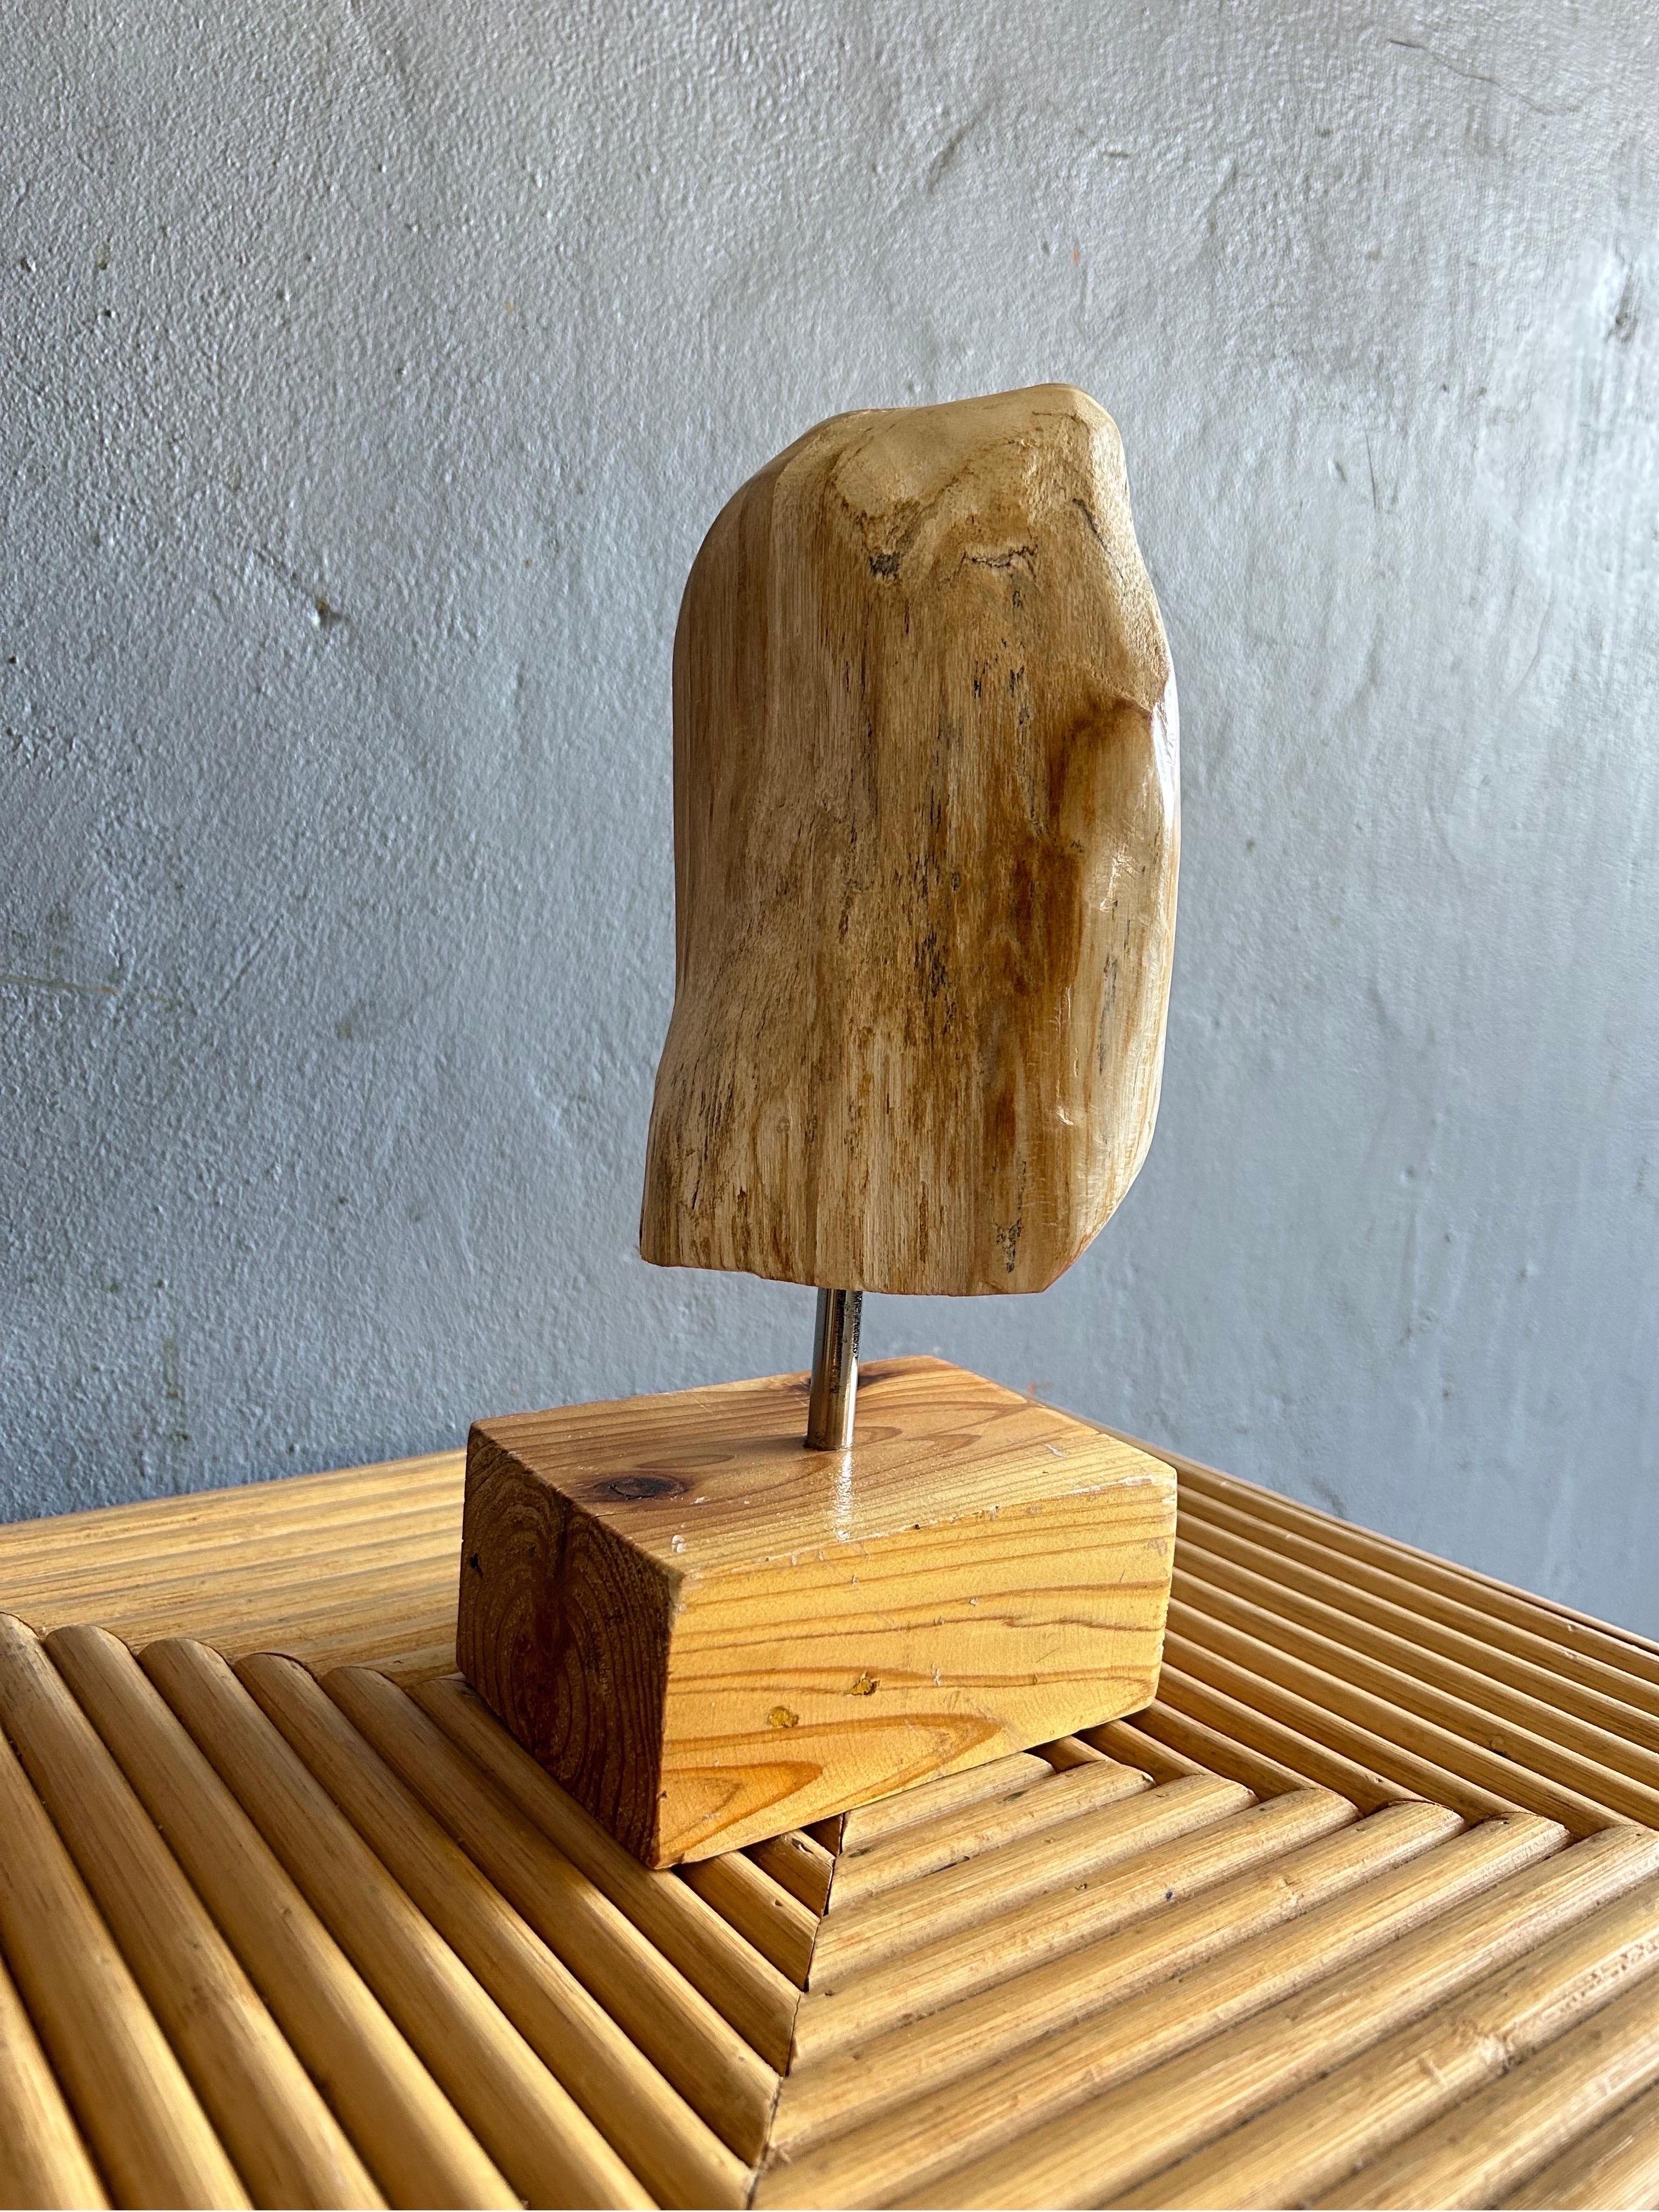 Brutalist Abstract Sculpture in Stone and Wood Denmark 1980s For Sale